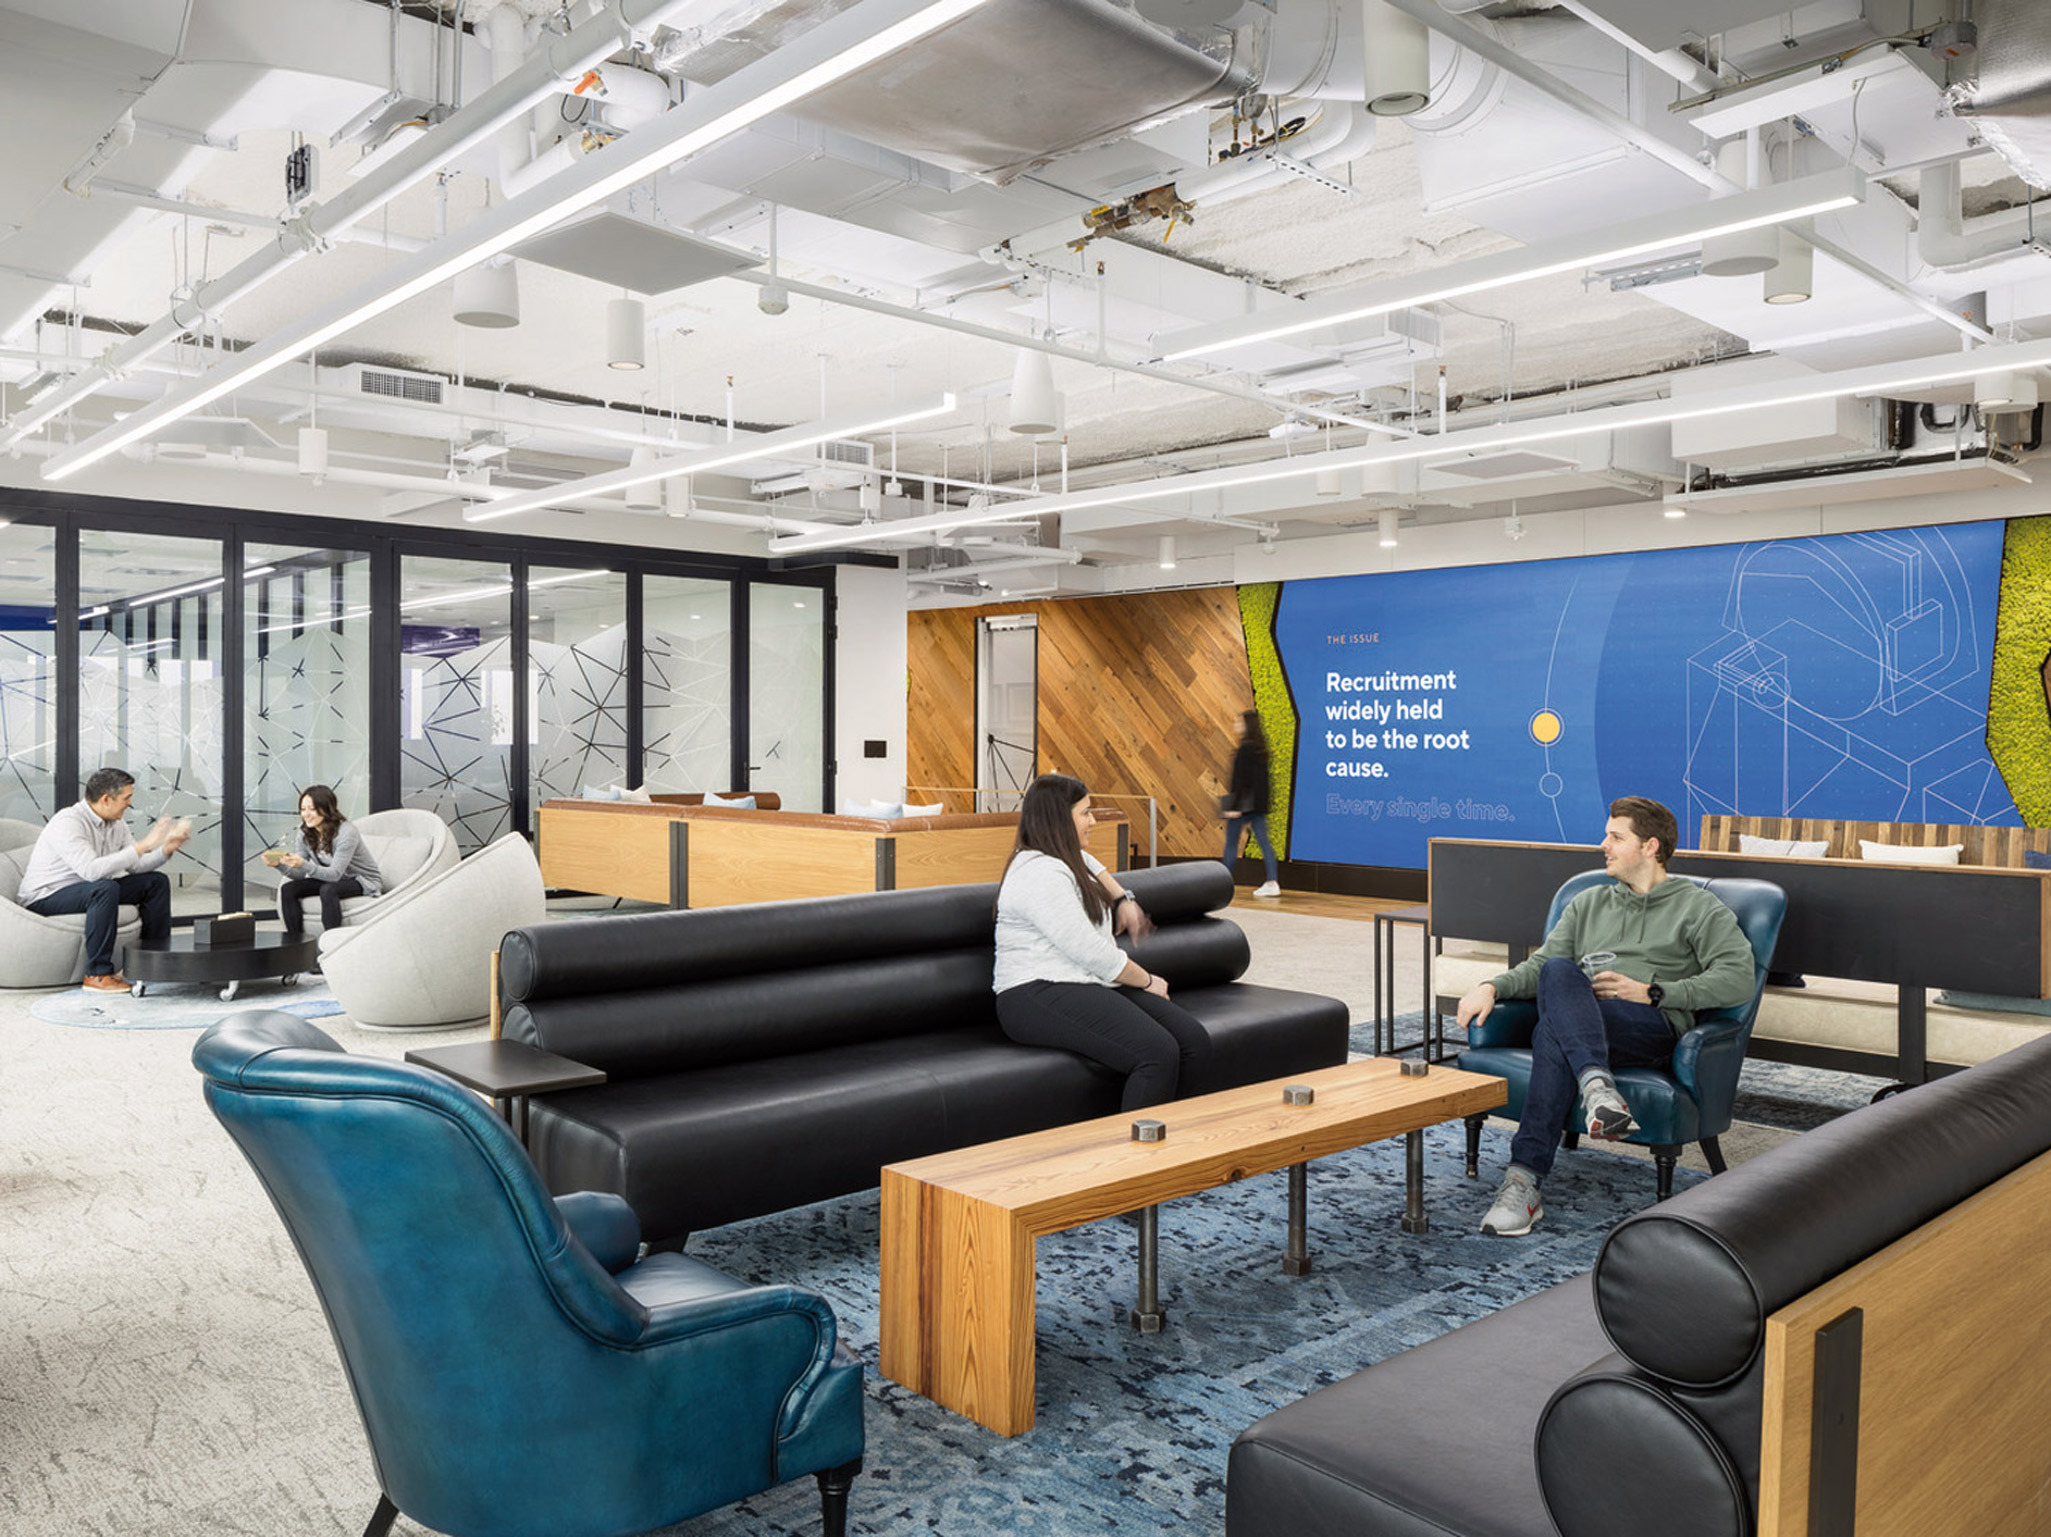 Modern office space with an open floor concept, featuring eclectic seating arrangements. Bold blue armchairs juxtapose with neutral-toned sofas, while a large recruitment-themed mural adds visual interest. Exposed ceiling beams and lighting fixtures create an urban industrial ambiance.